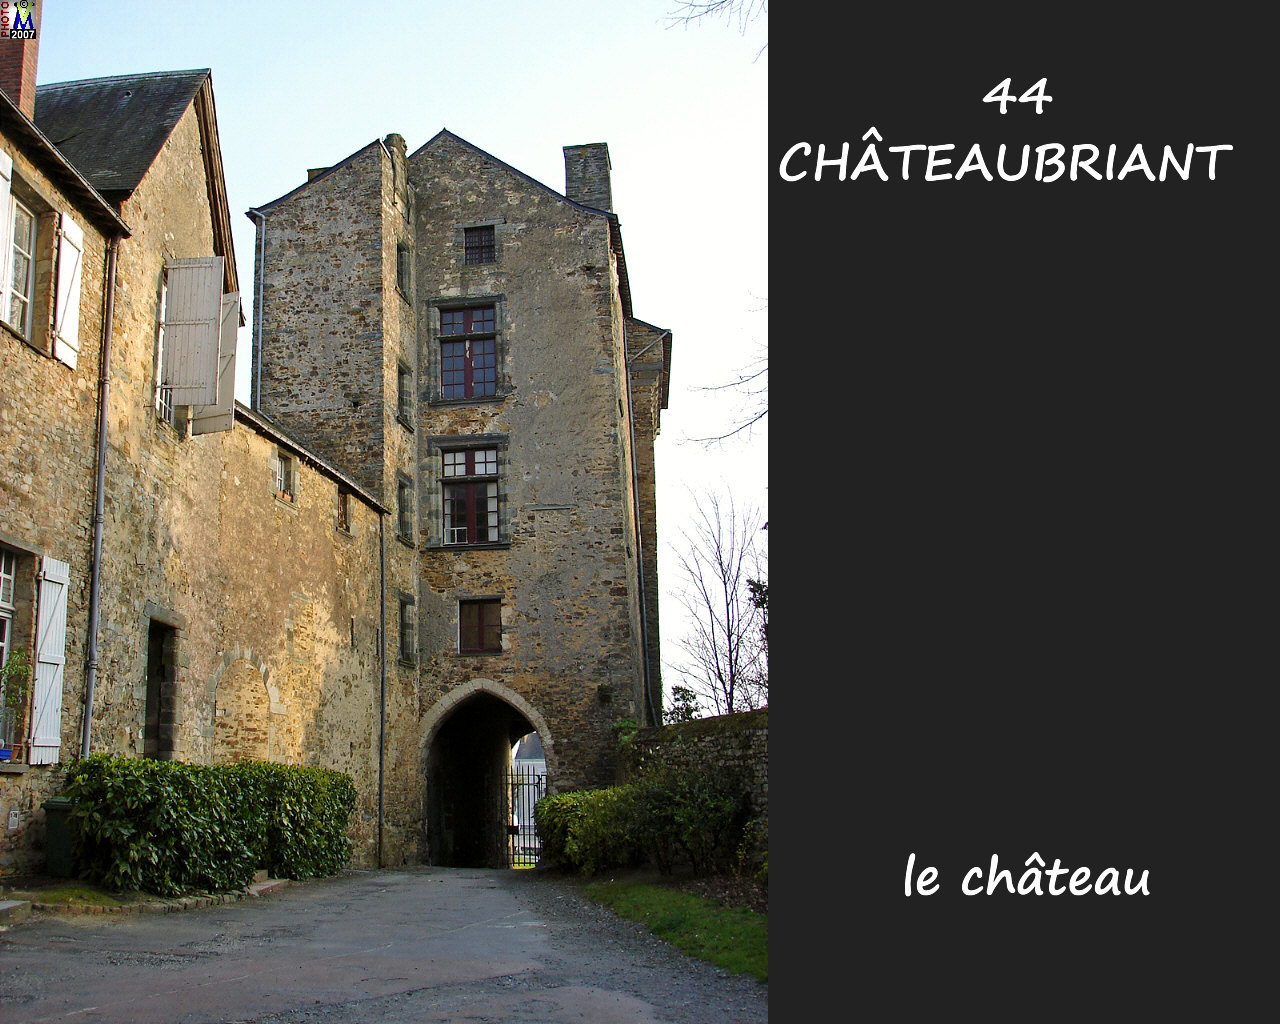 44CHATEAUBRIANT_chateau_112.jpg